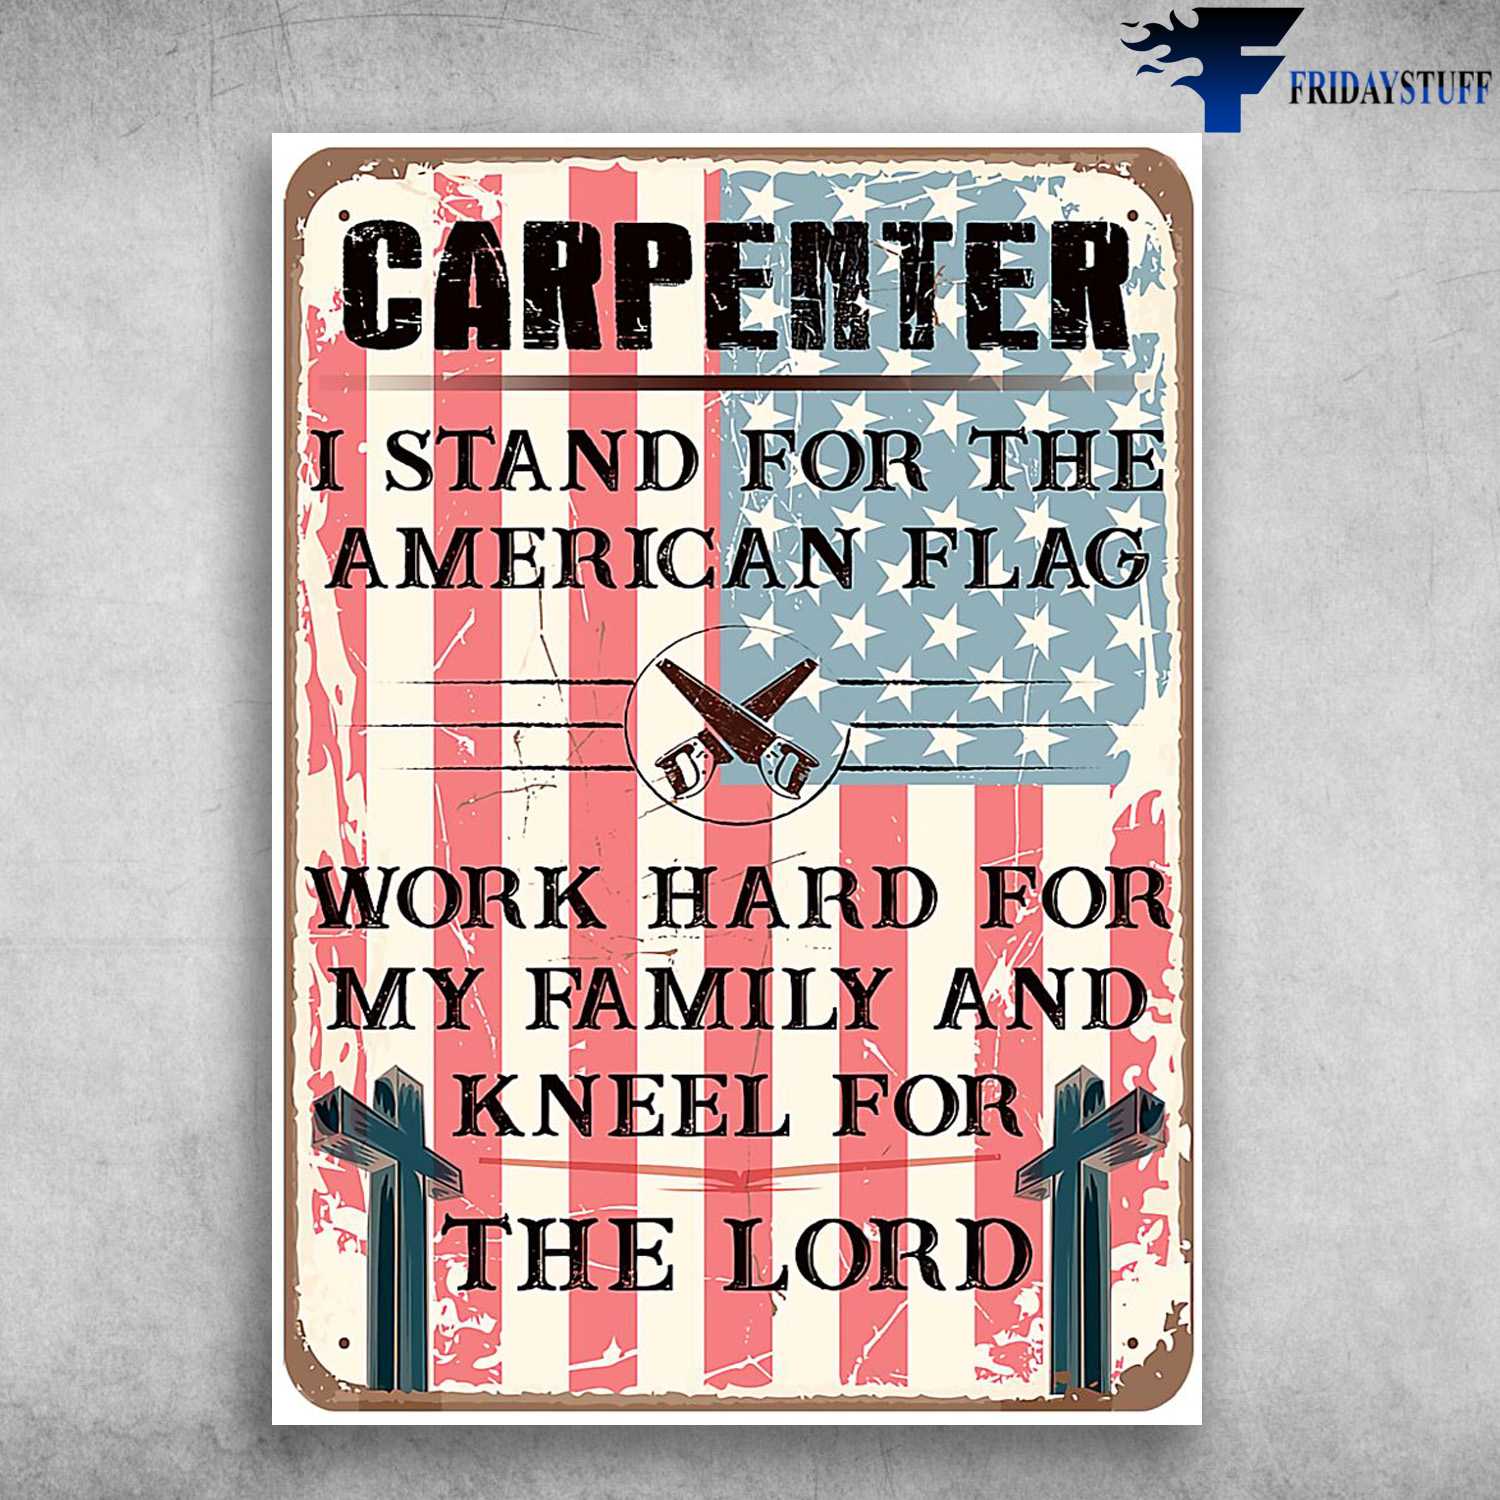 American Carpenter - Carpenter, I Stand For The American Flag, Work Hard For My Family, And Kneel For The Lord